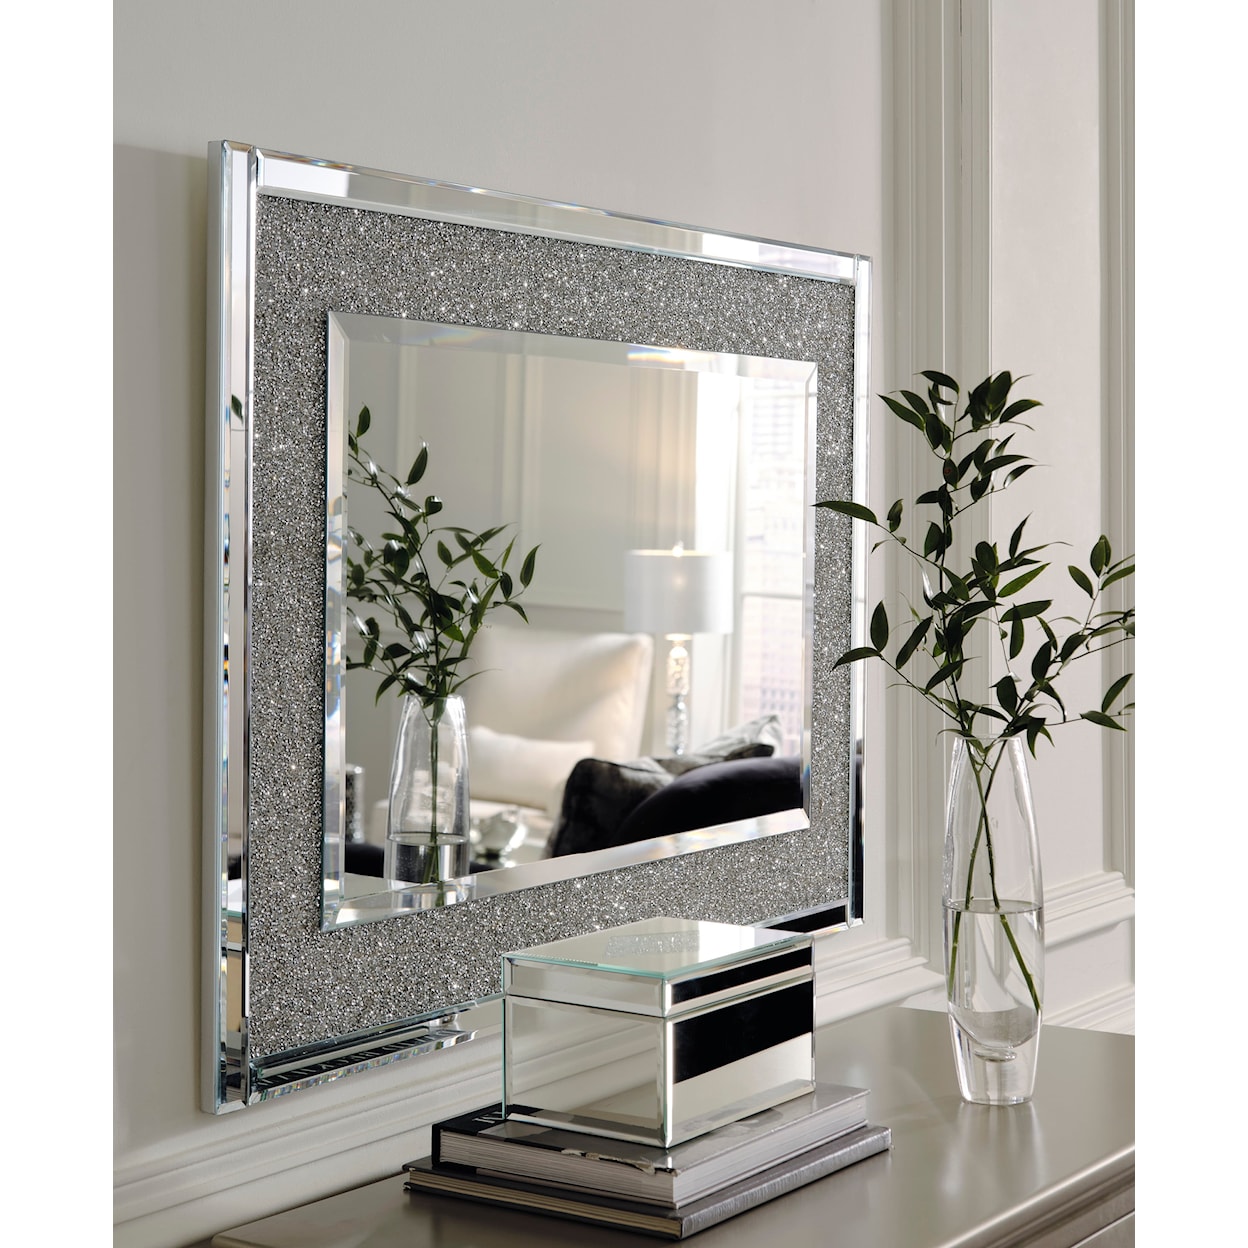 Benchcraft Accent Mirrors Kingsleigh Accent Mirror